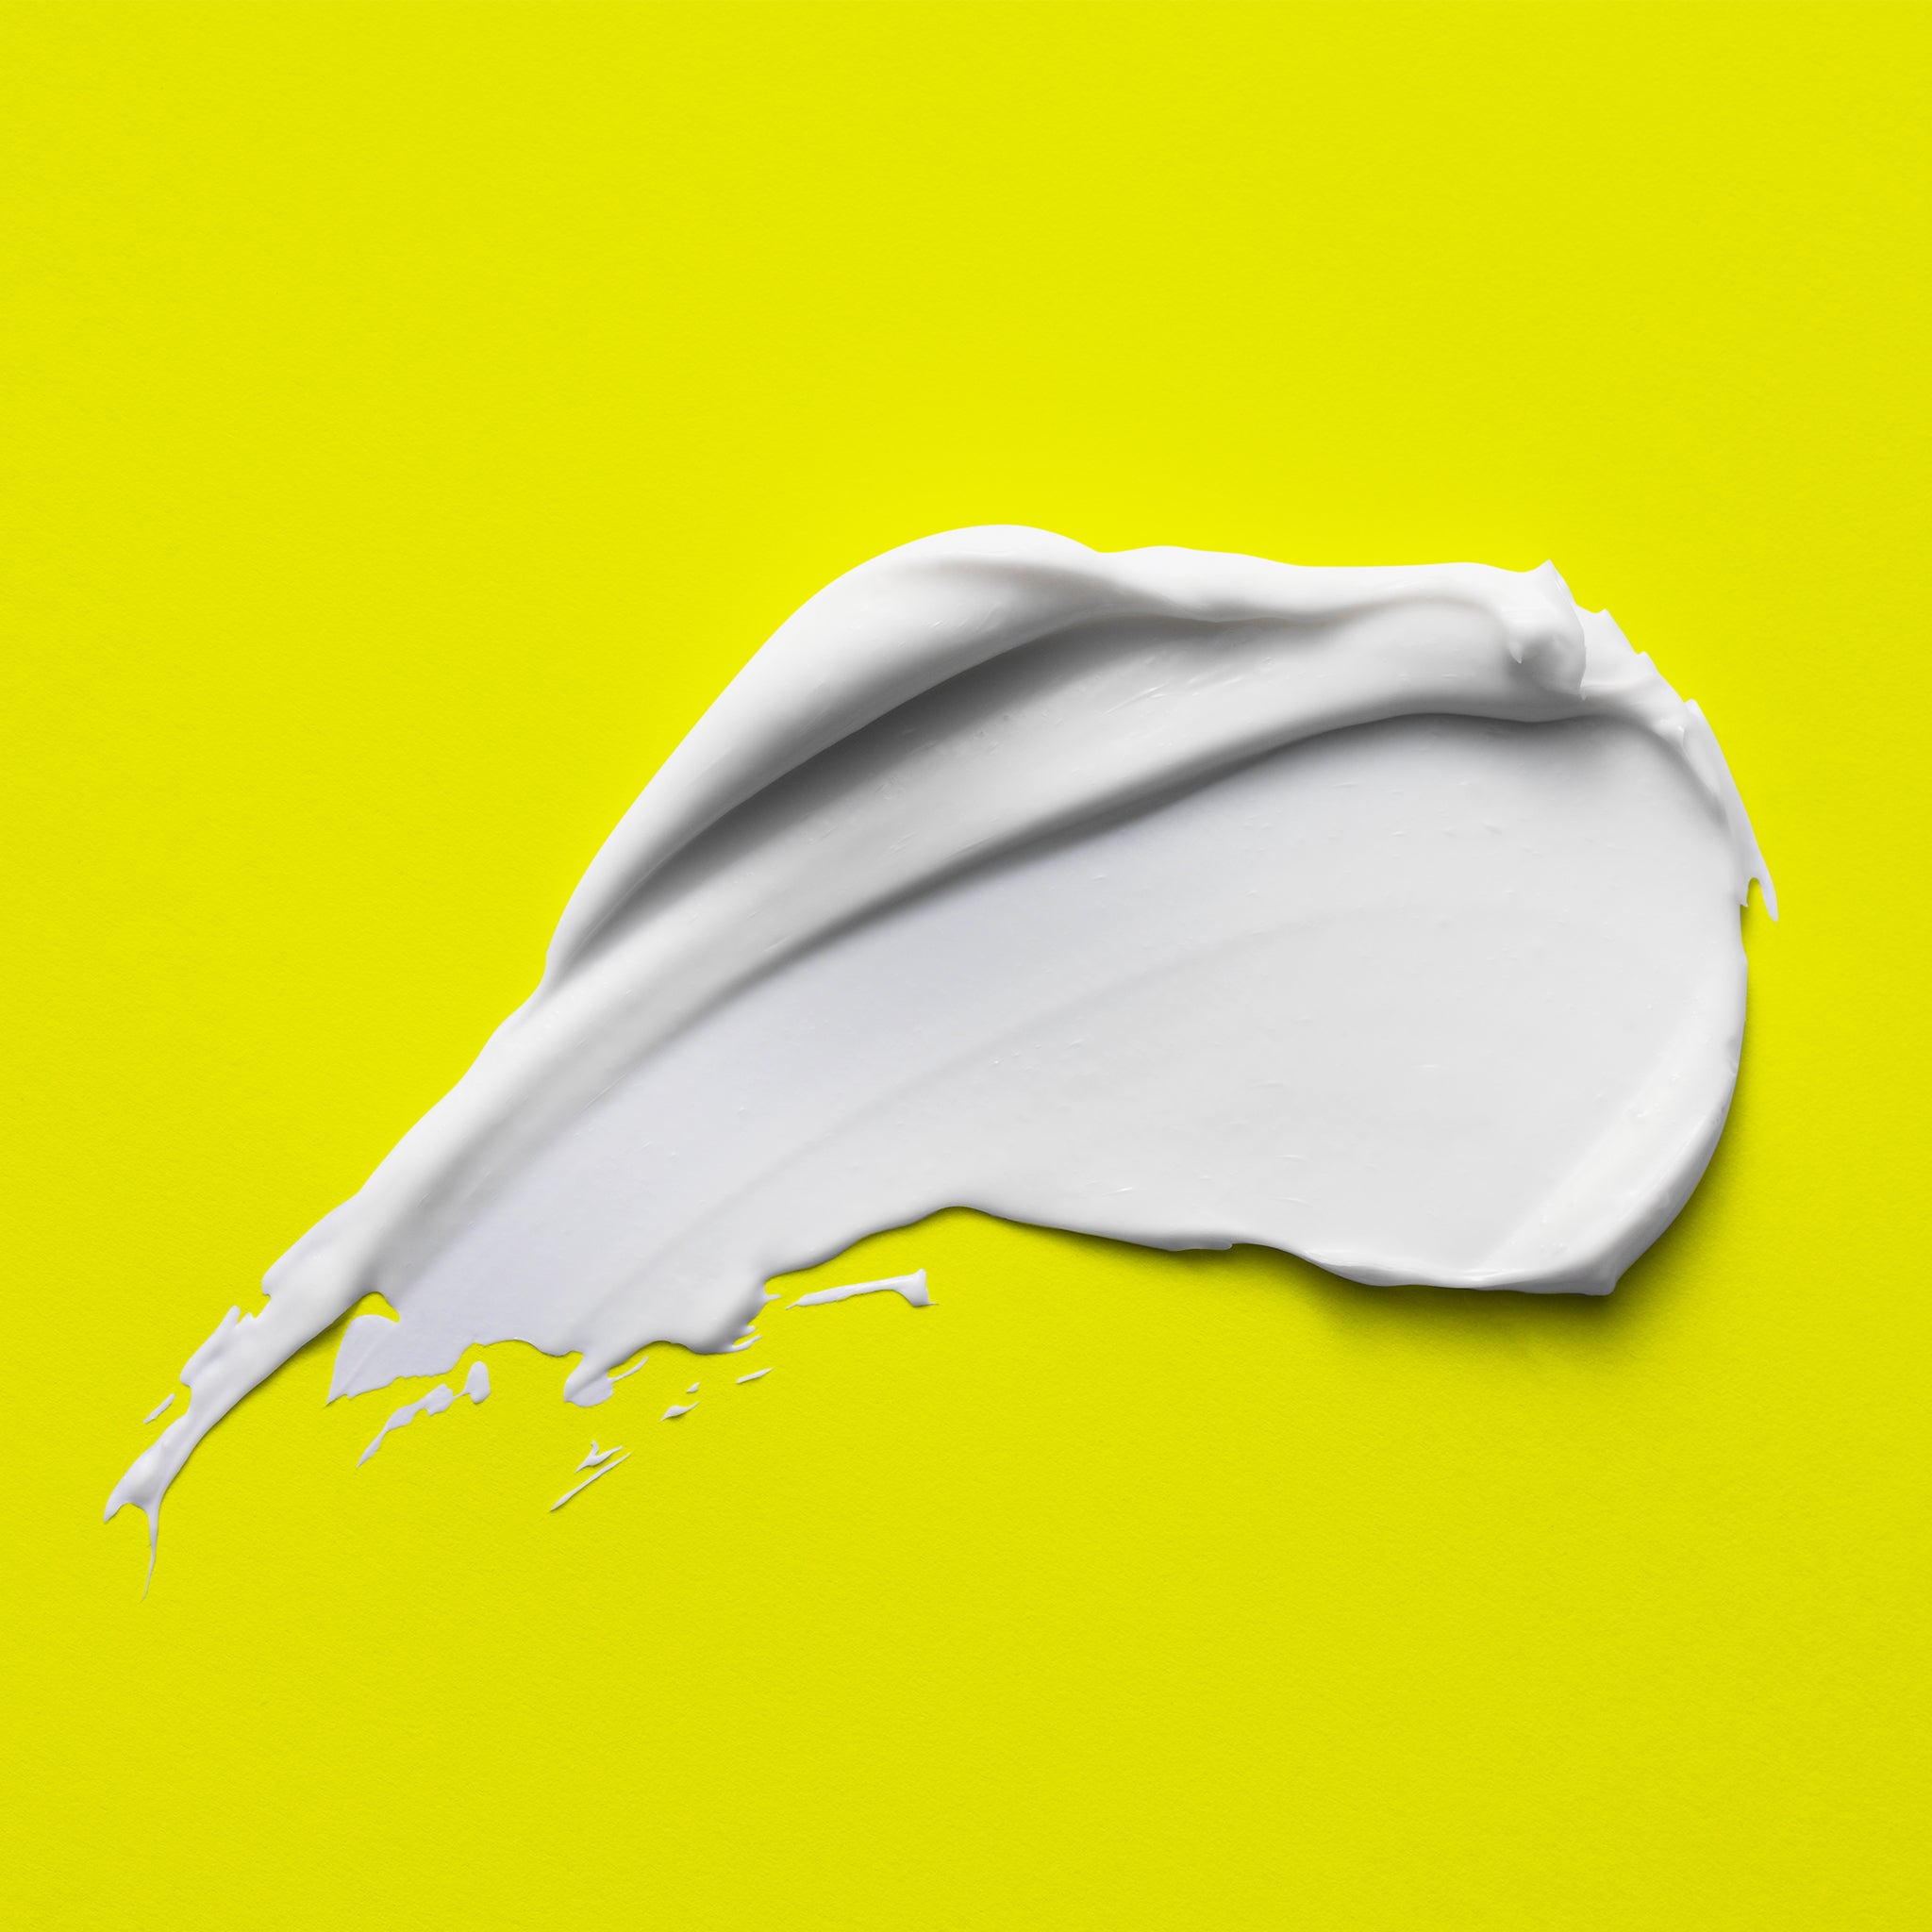 A smear of bright white cream on a bright yellow background